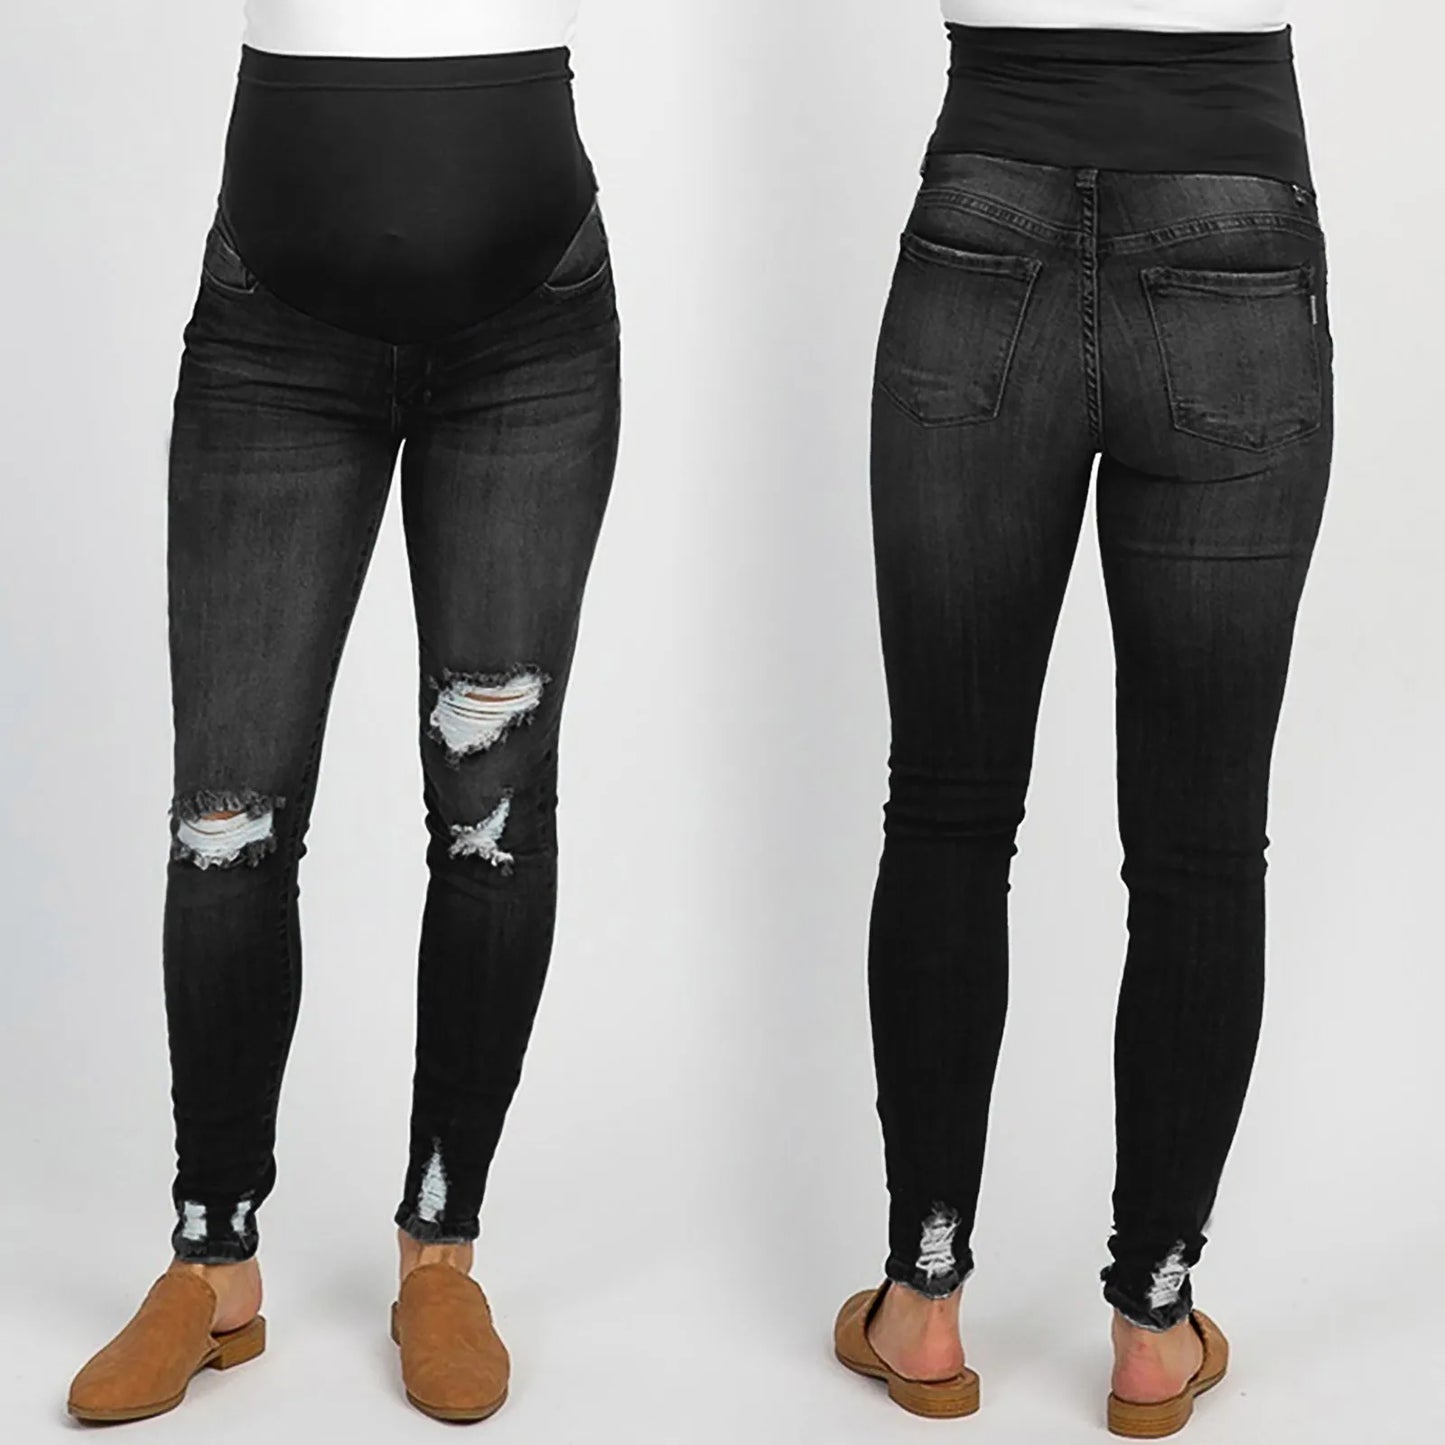 New High Waist Maternity Jeans - Skinny Pencil Pants for Pregnant Women, Ideal for Summer and Autumn